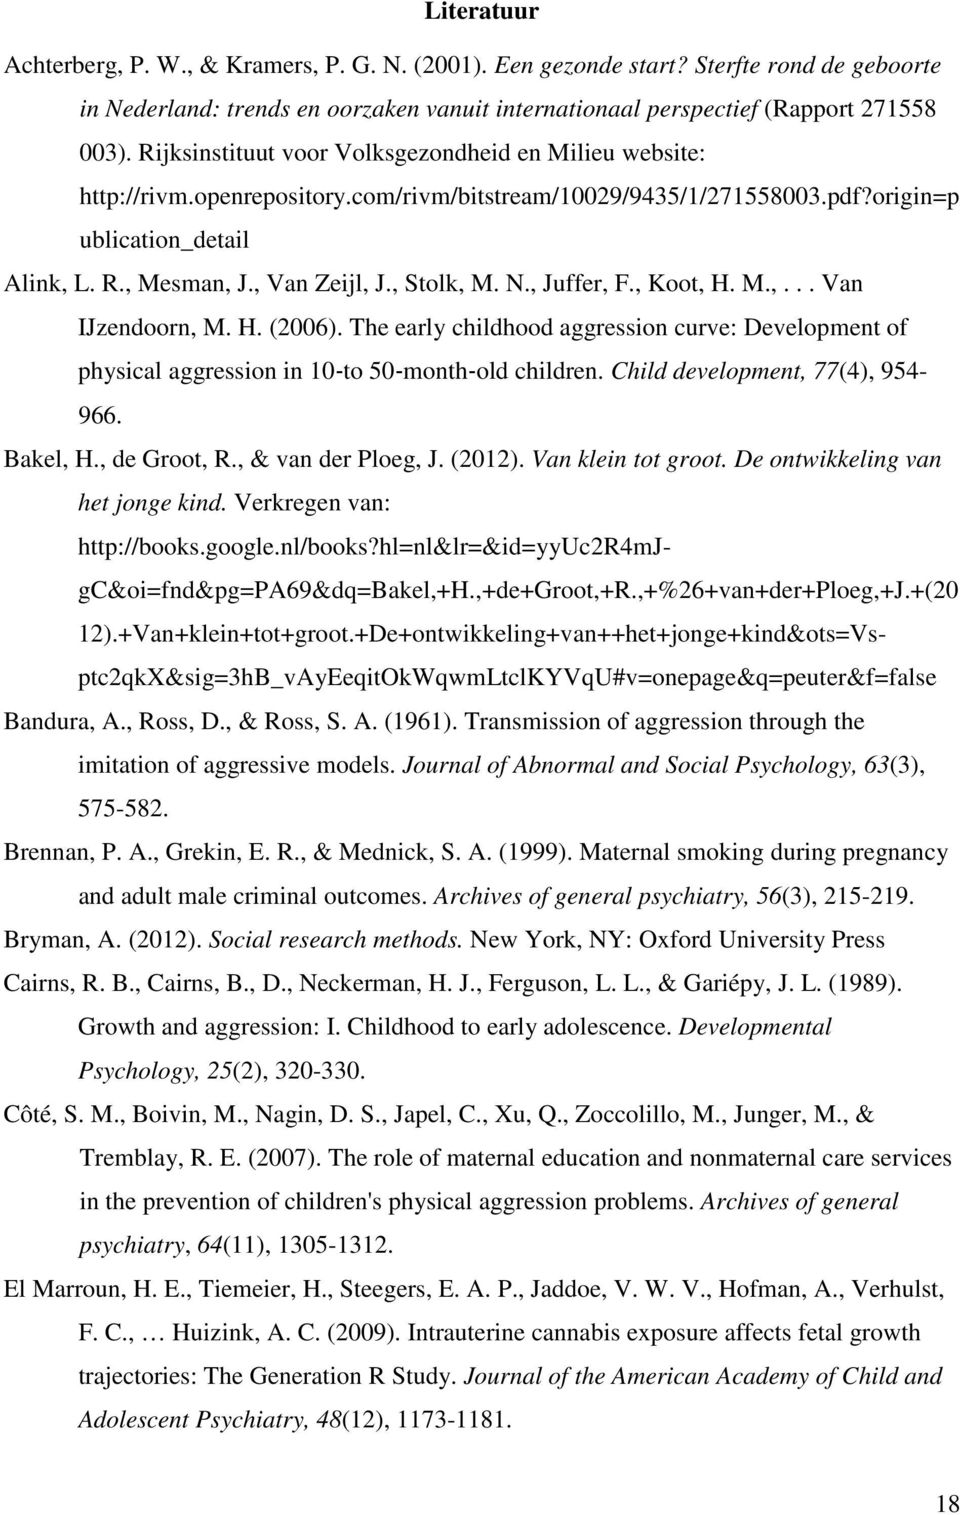 , Stolk, M. N., Juffer, F., Koot, H. M.,... Van IJzendoorn, M. H. (2006). The early childhood aggression curve: Development of physical aggression in 10 to 50 month old children.